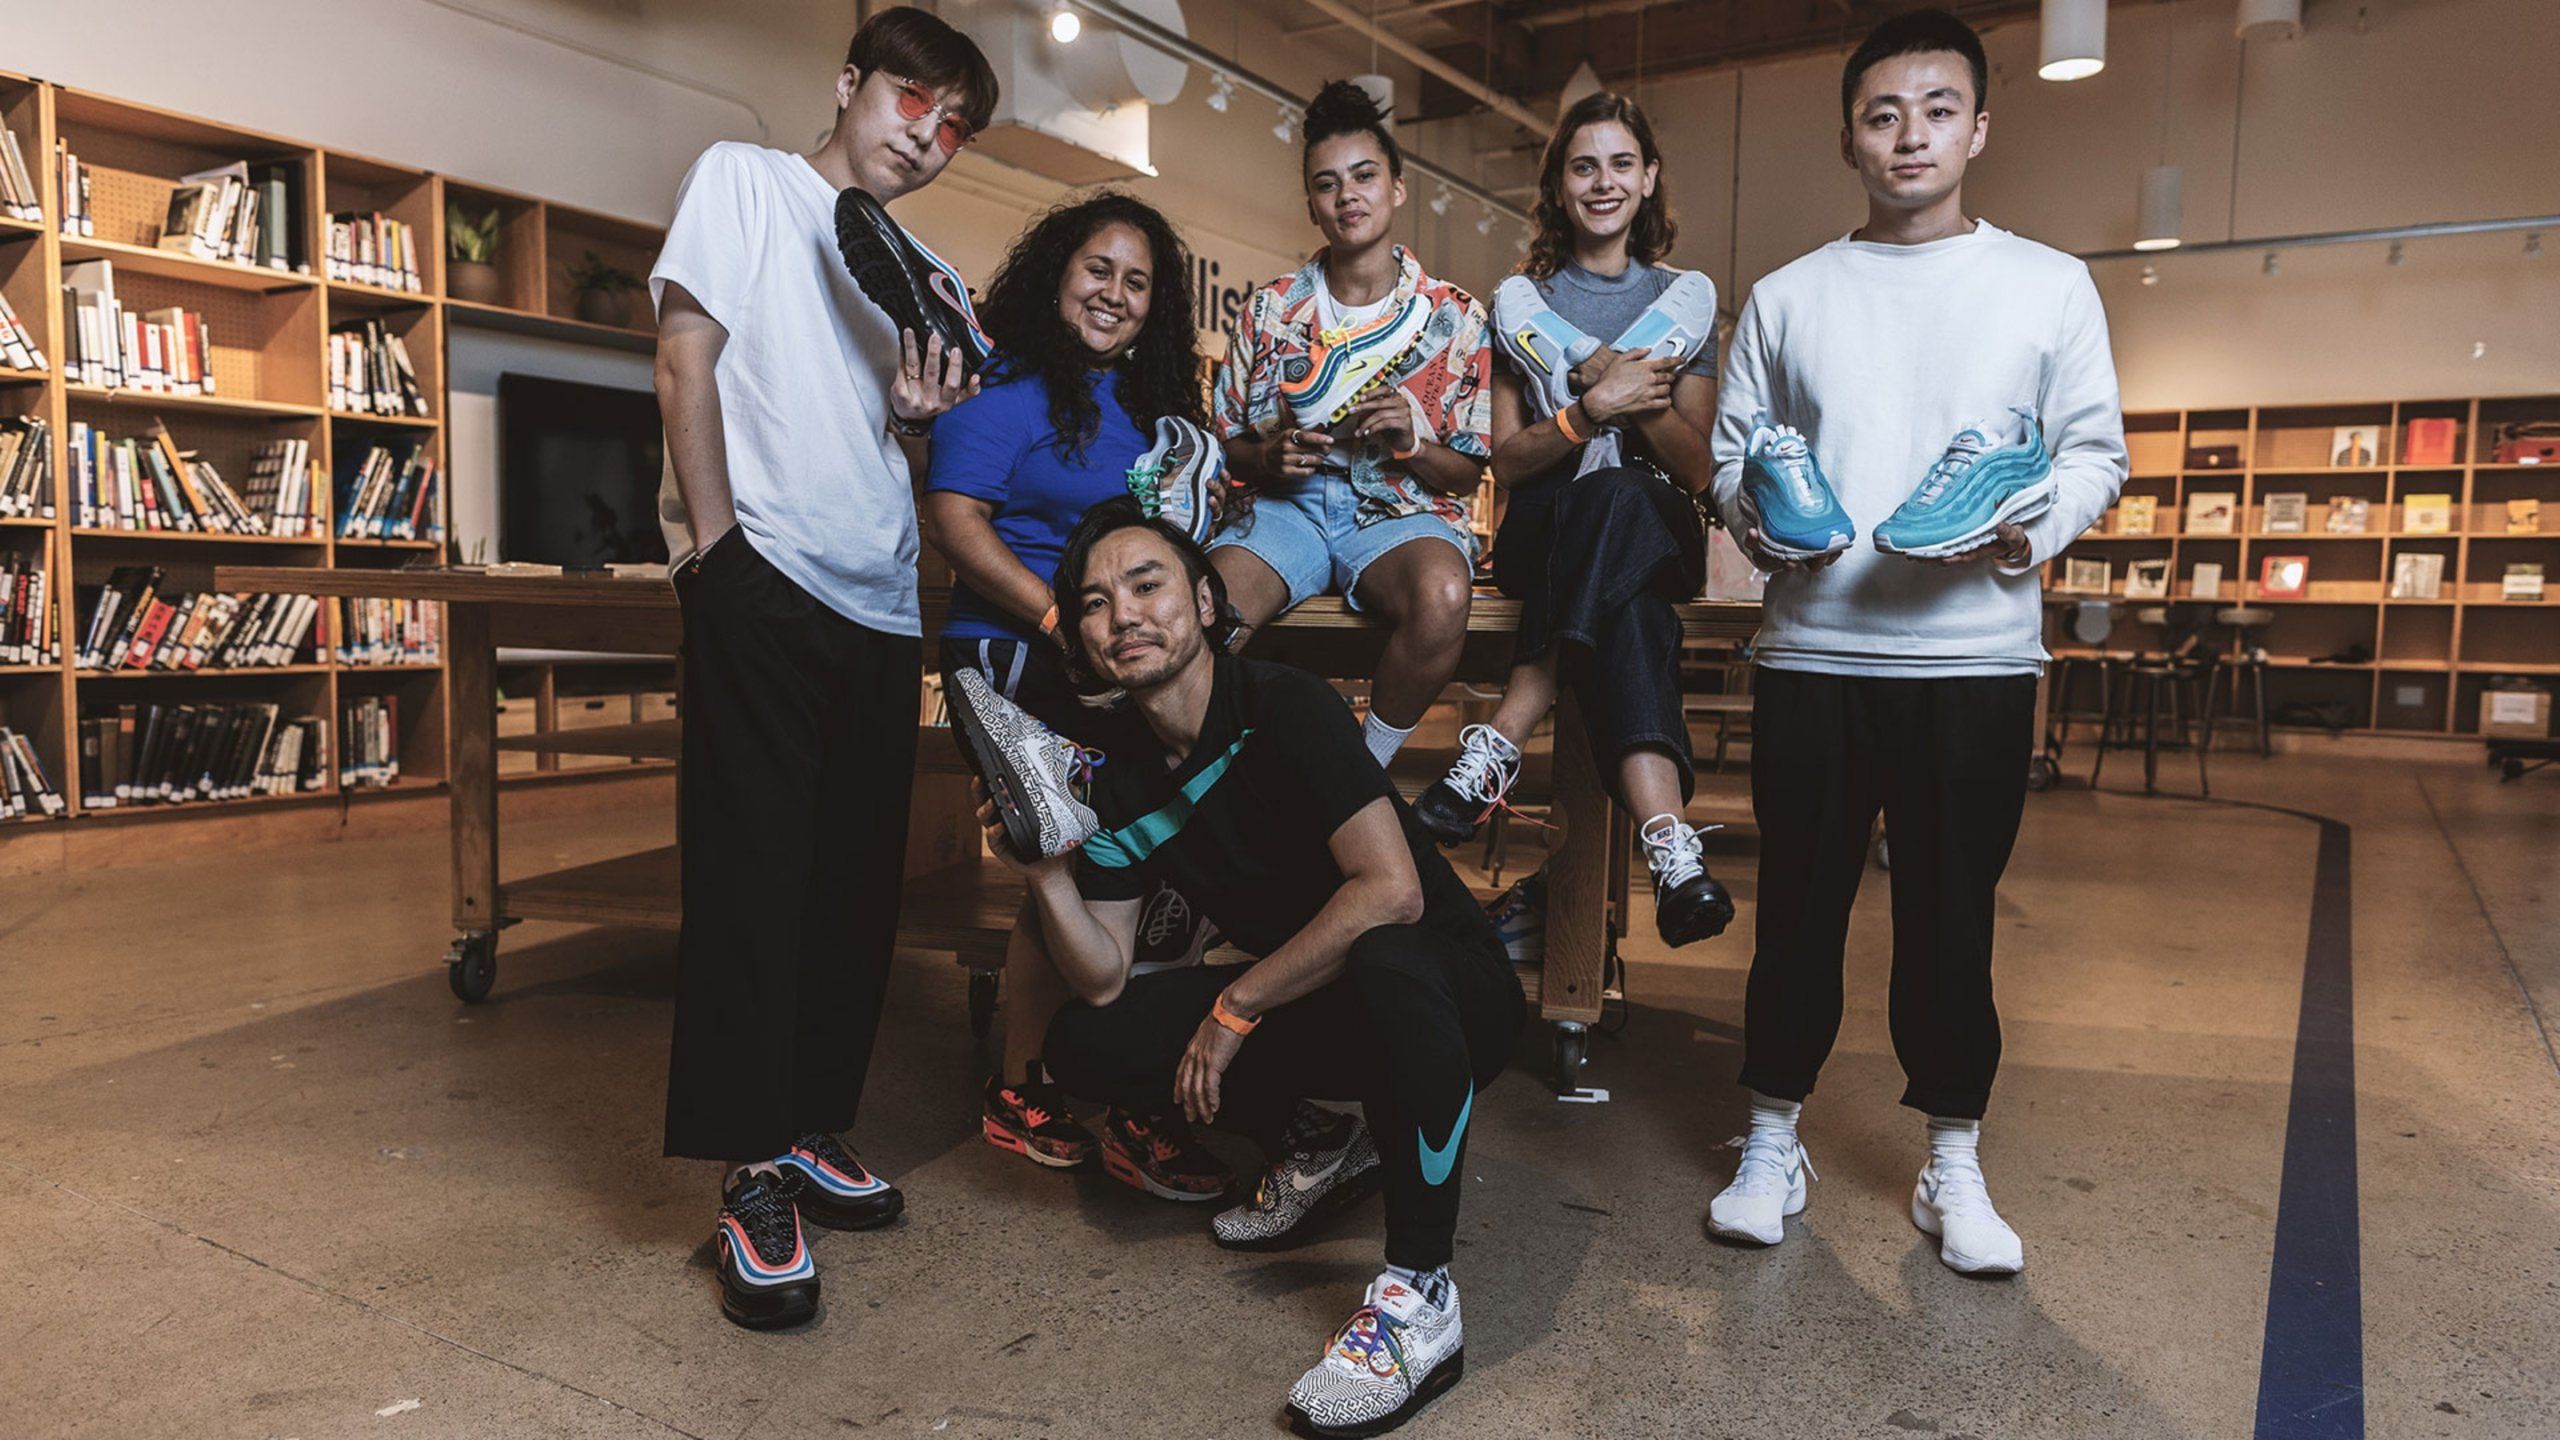 All desingers holding their airmax shoes together in group shot